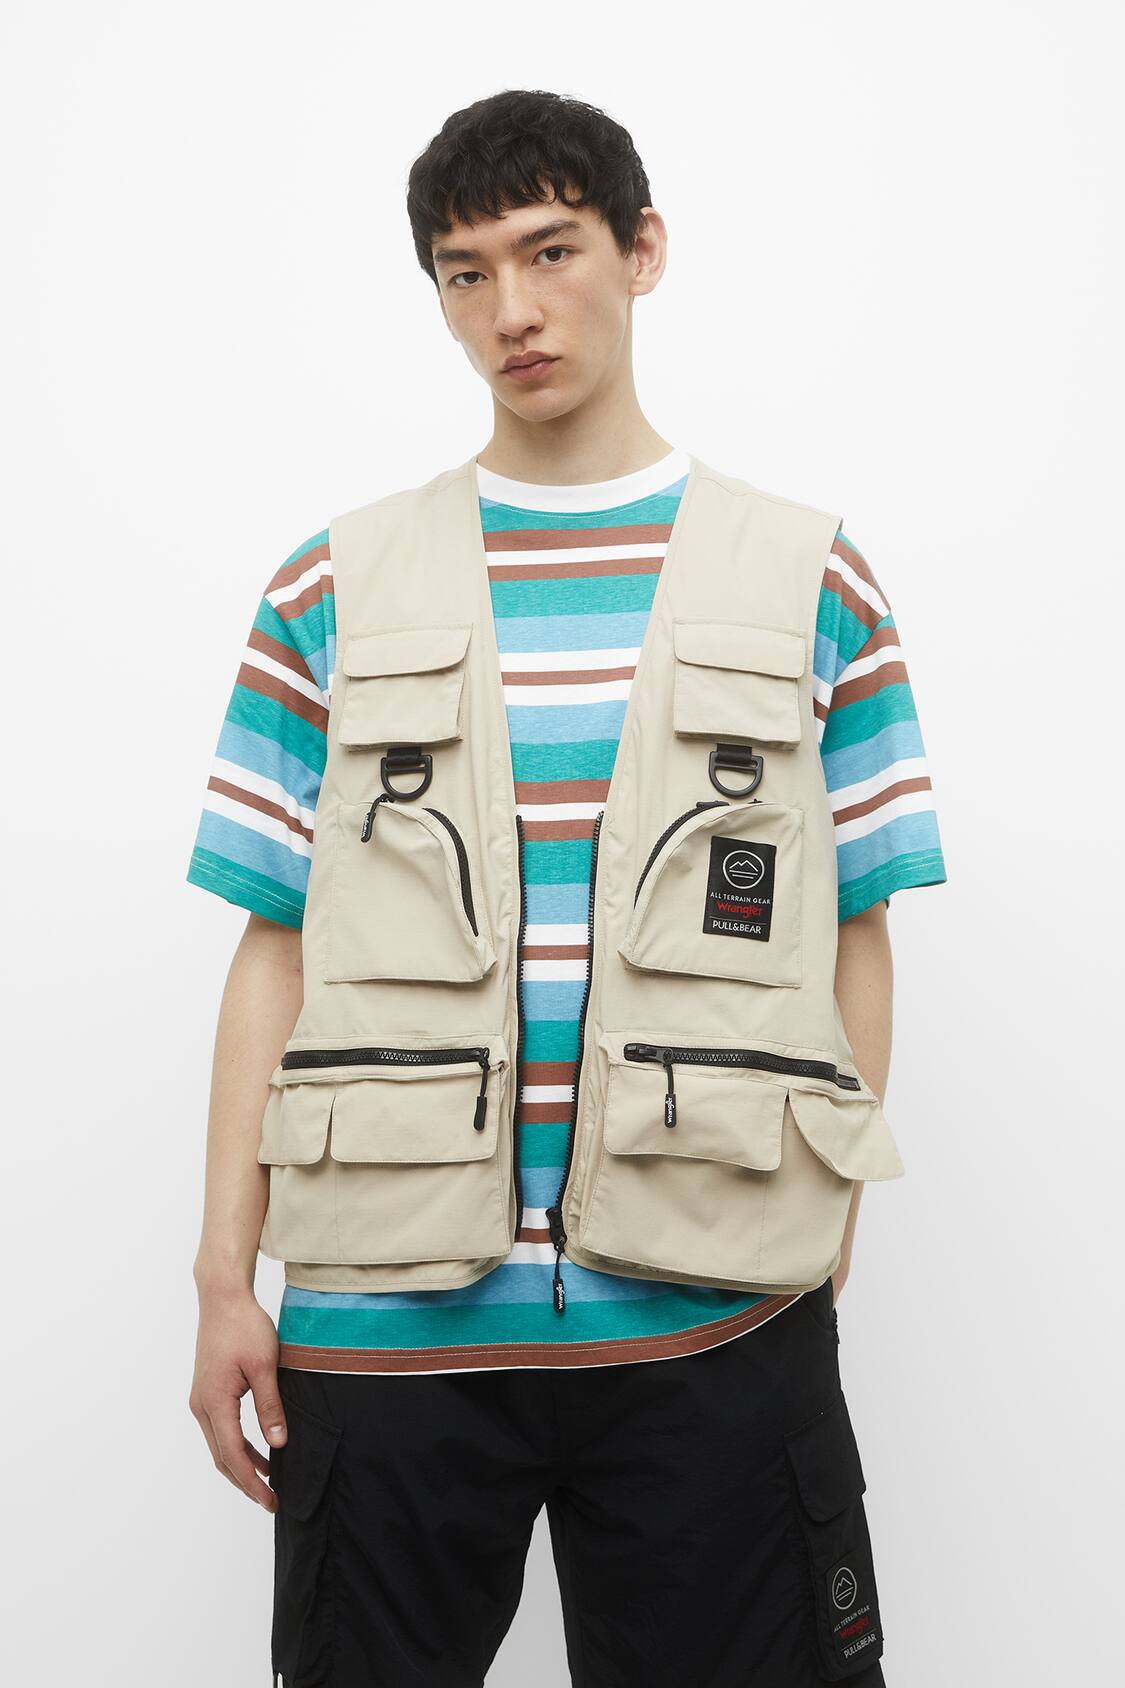 gilet pull and bear homme